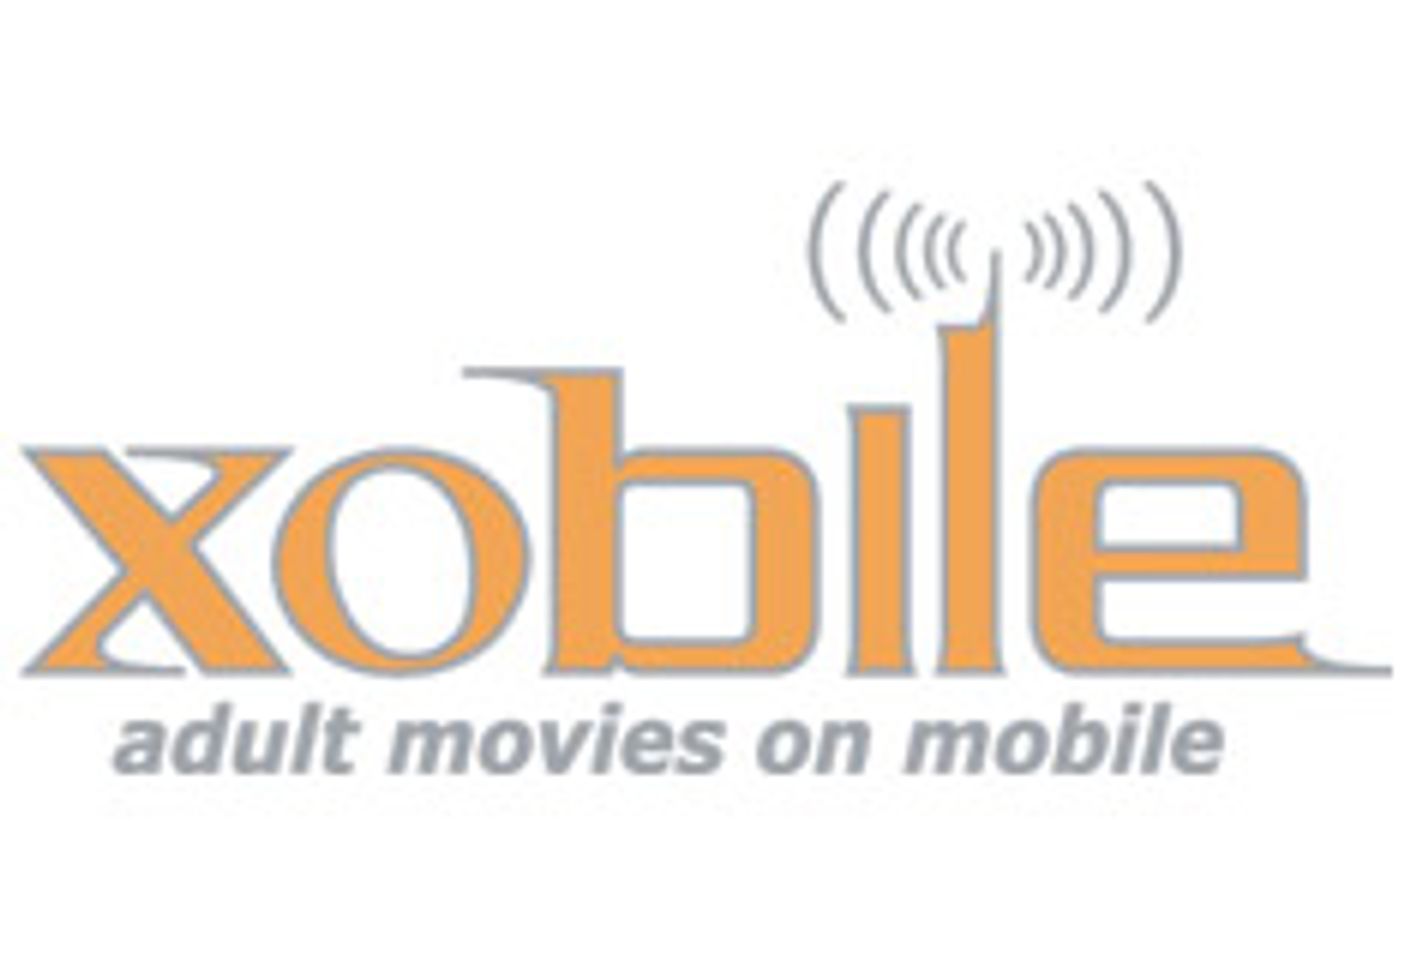 Earl Miller Signs Mobile Deal With Xobile